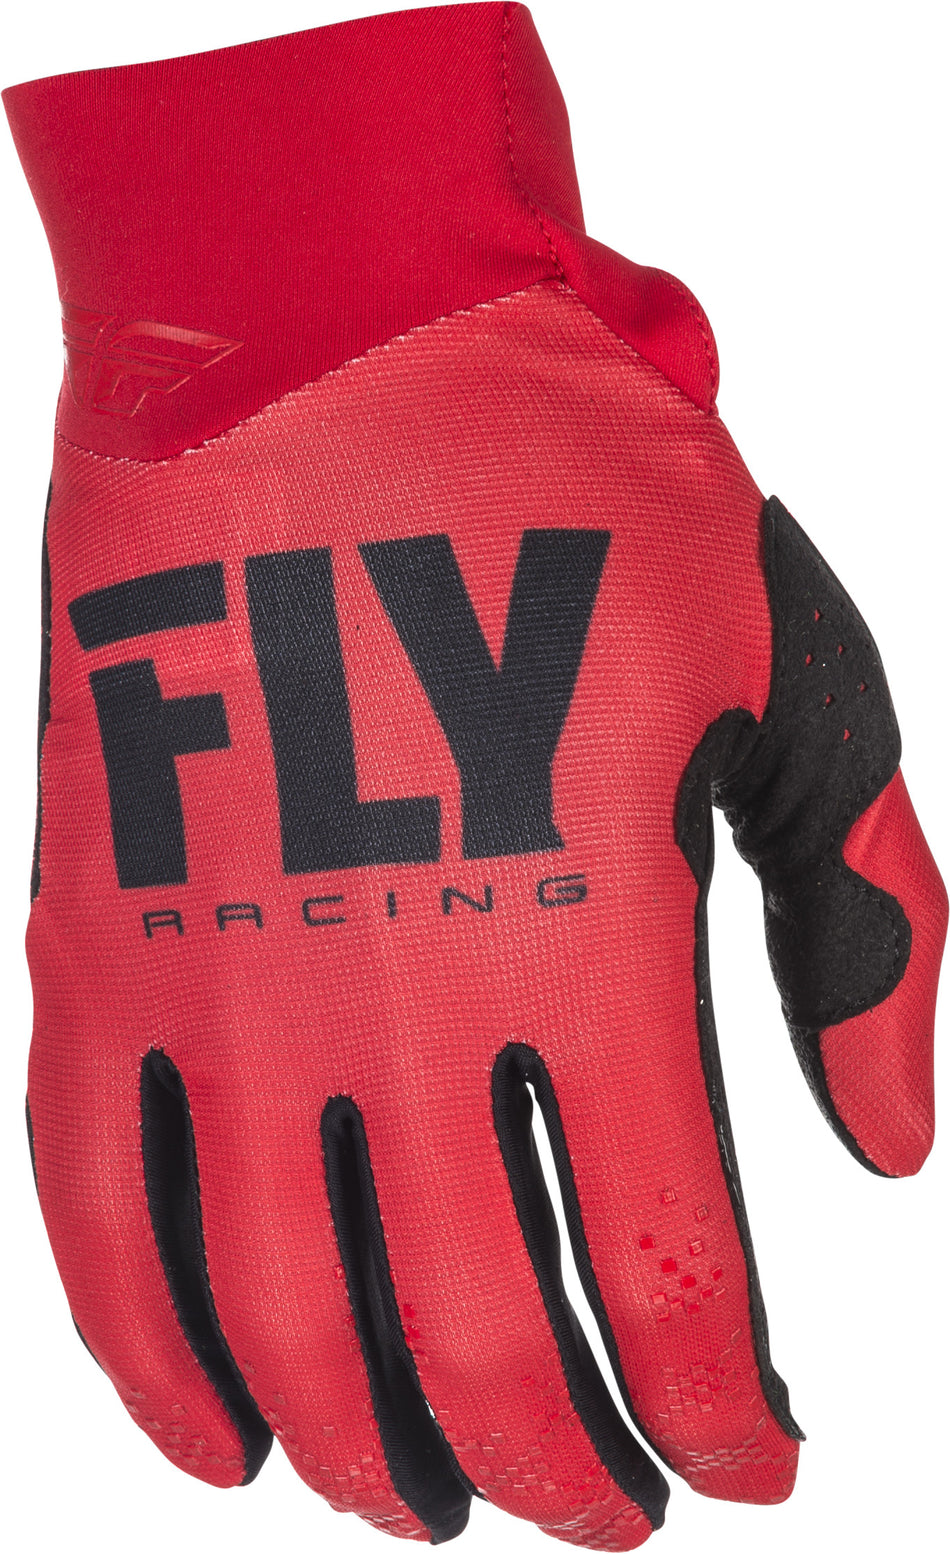 FLY RACING Pro Lite Gloves Red Sz 10 371-81210